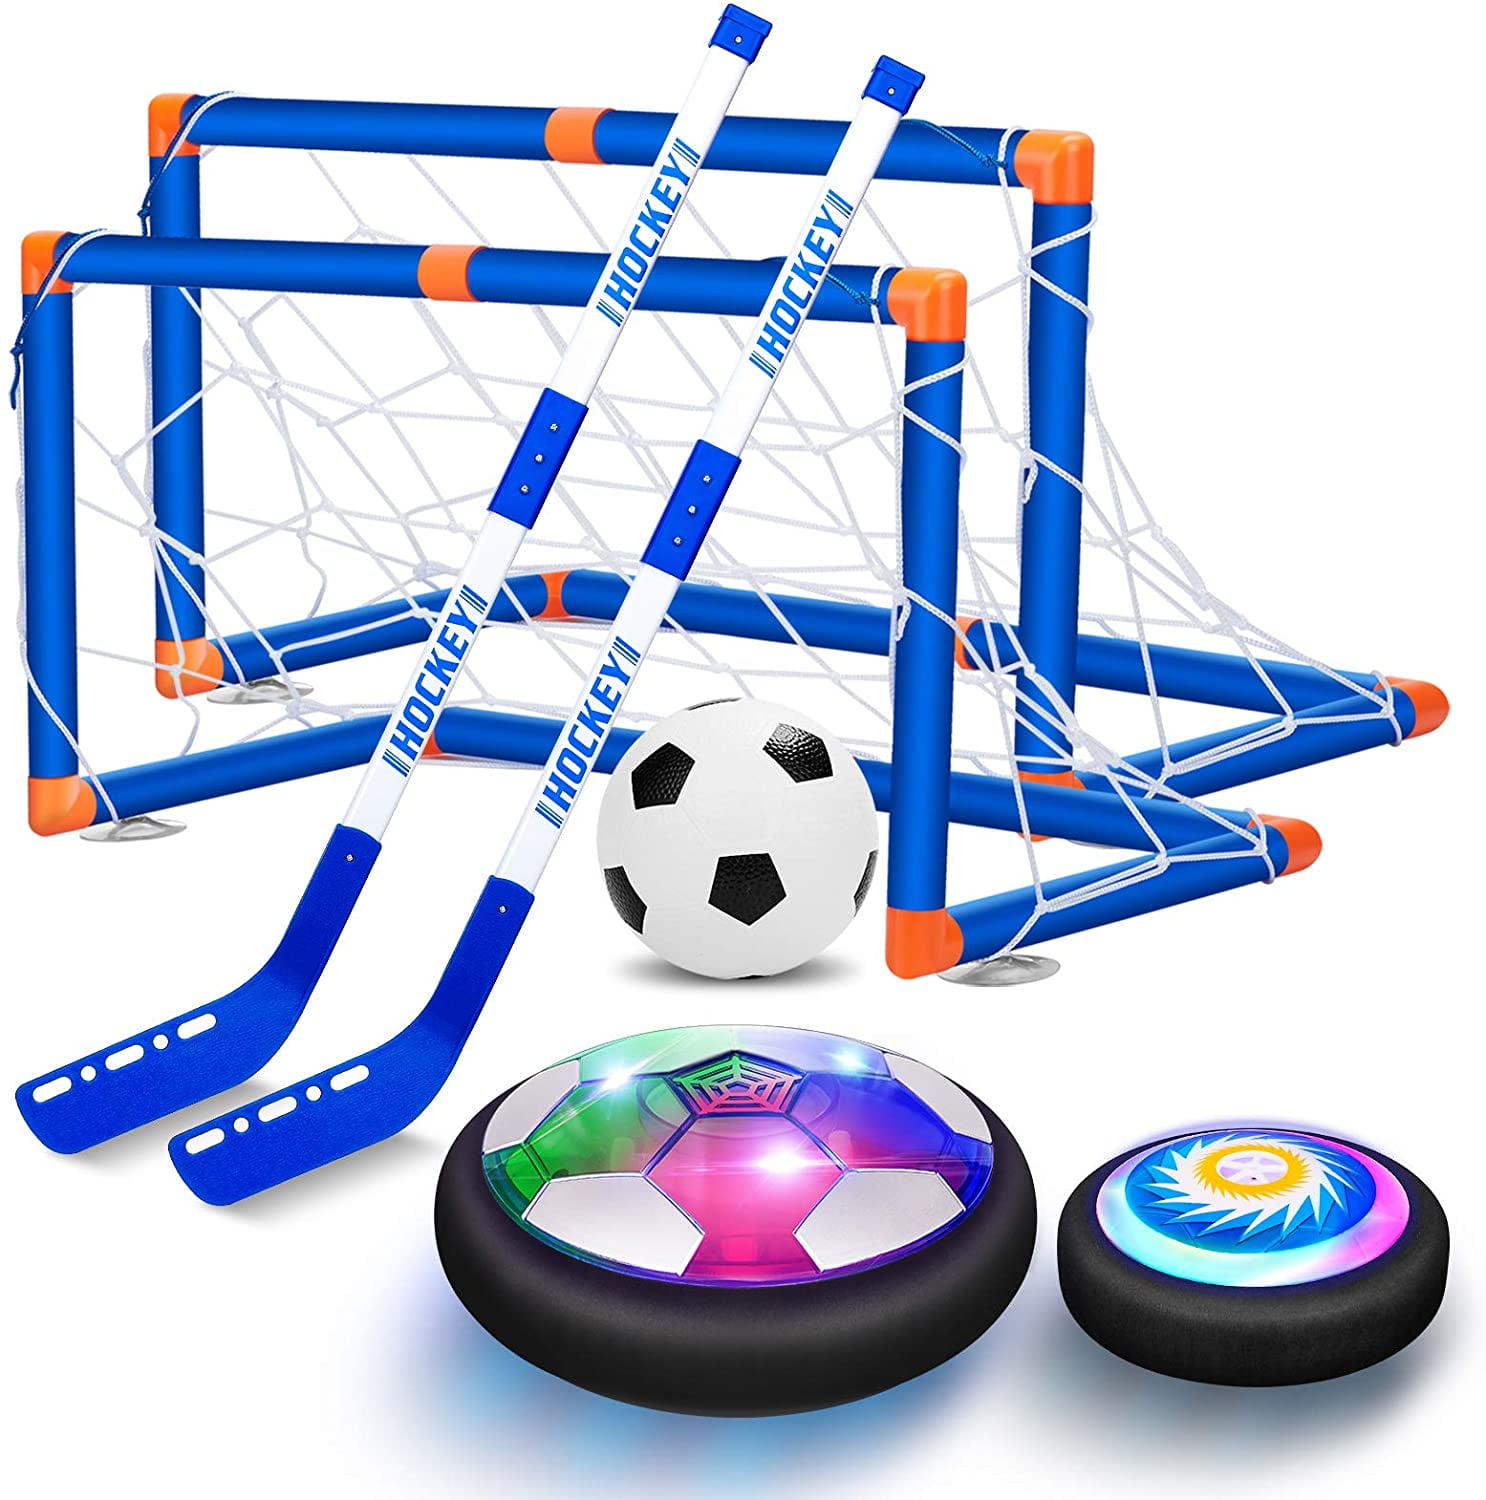 USB Rechargeable and Battery 3 Details about   VEPOWER 2-in-1 Hover Hockey Soccer Kids Toys Set 